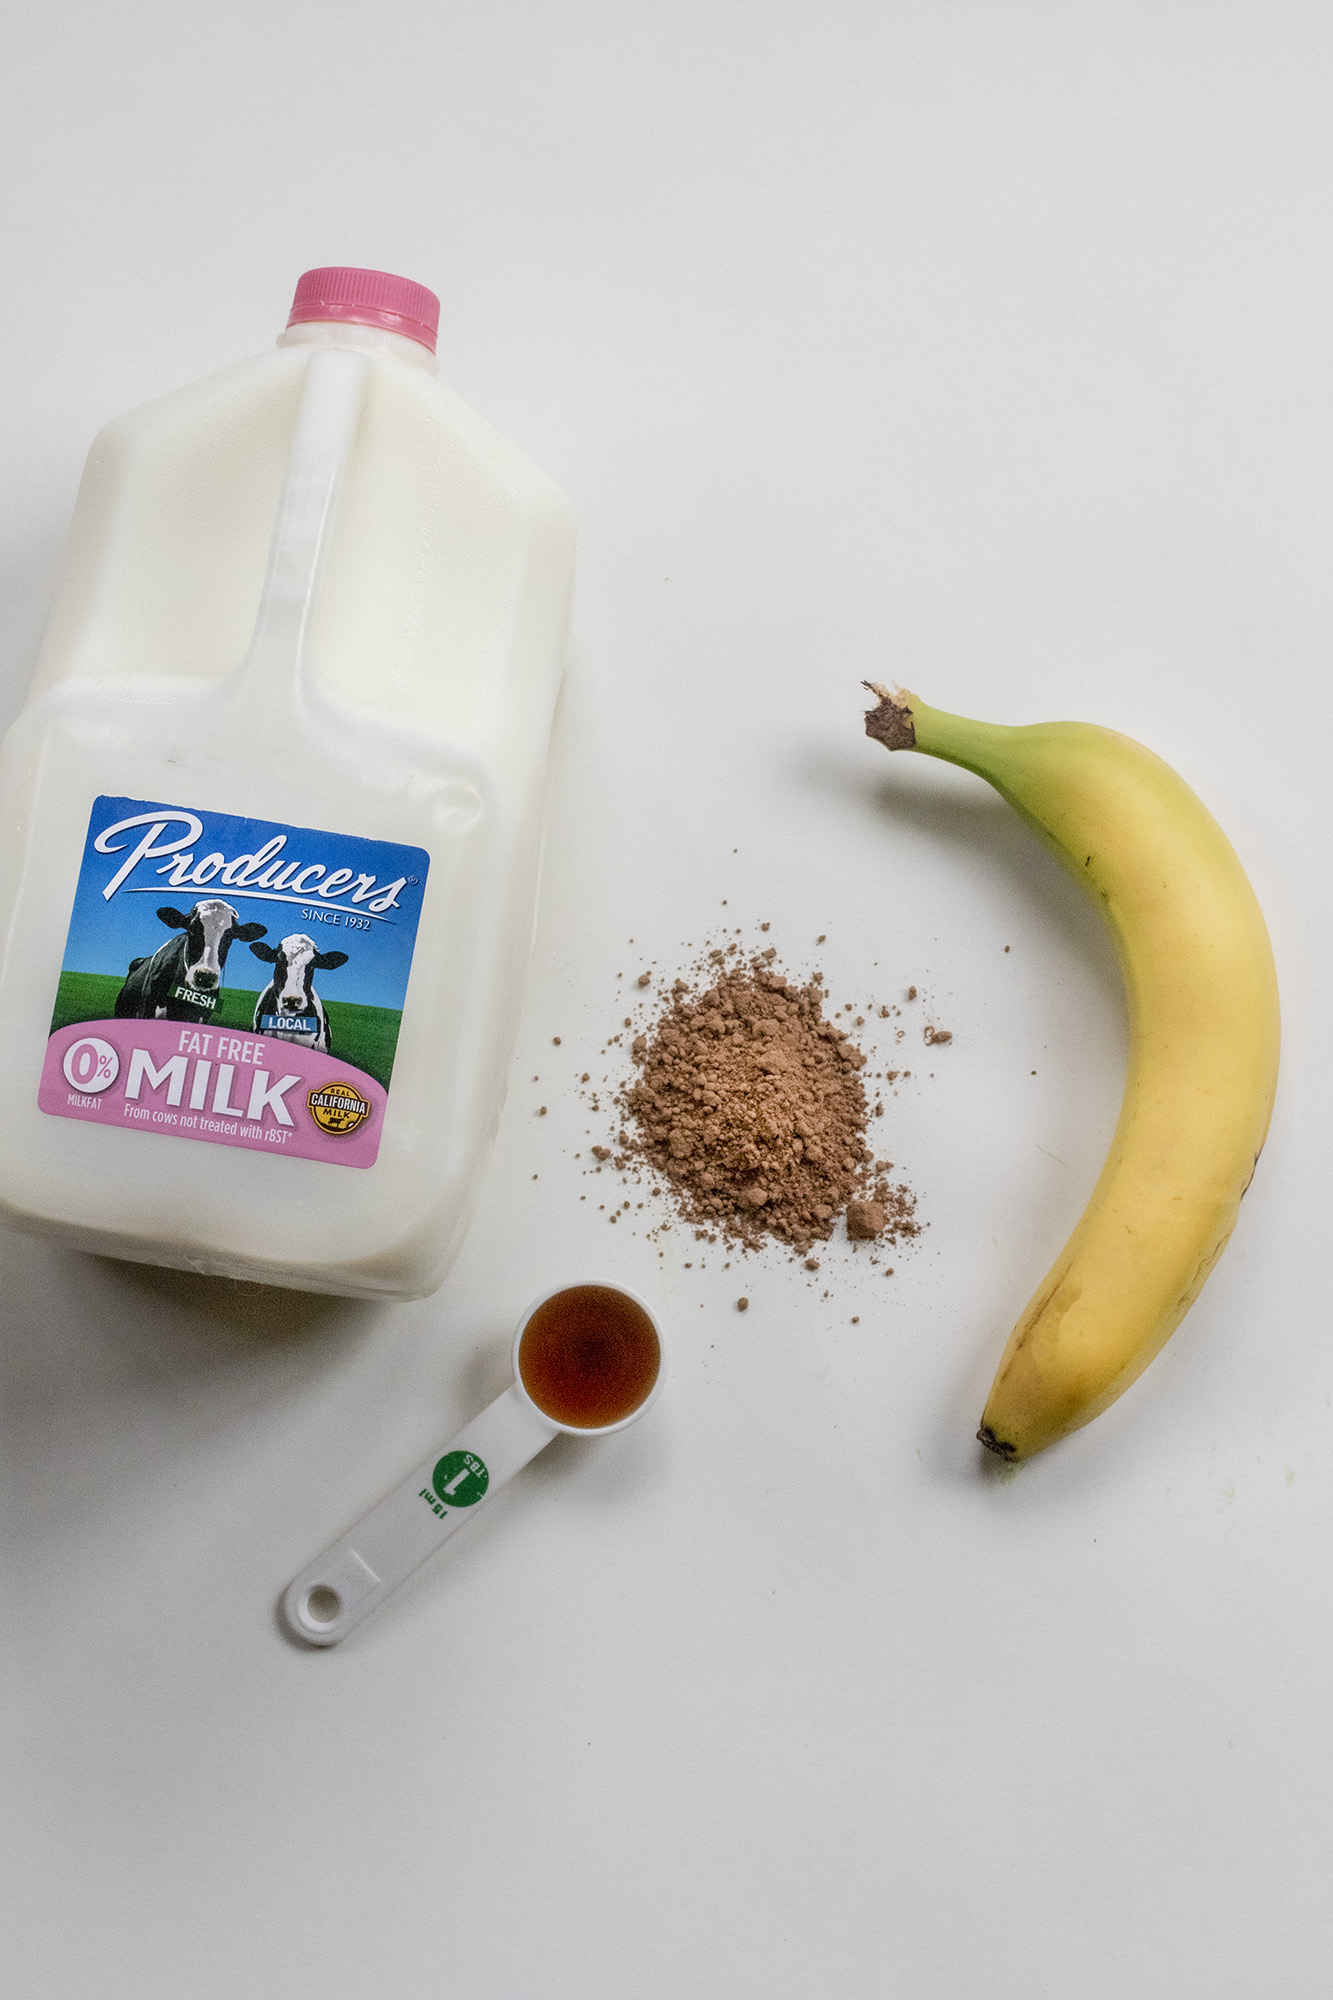 Producers Fat Free Gallon of milk, 1 tablespoon of maple syrup, cinnamon, and a banana laying on a flat white background.